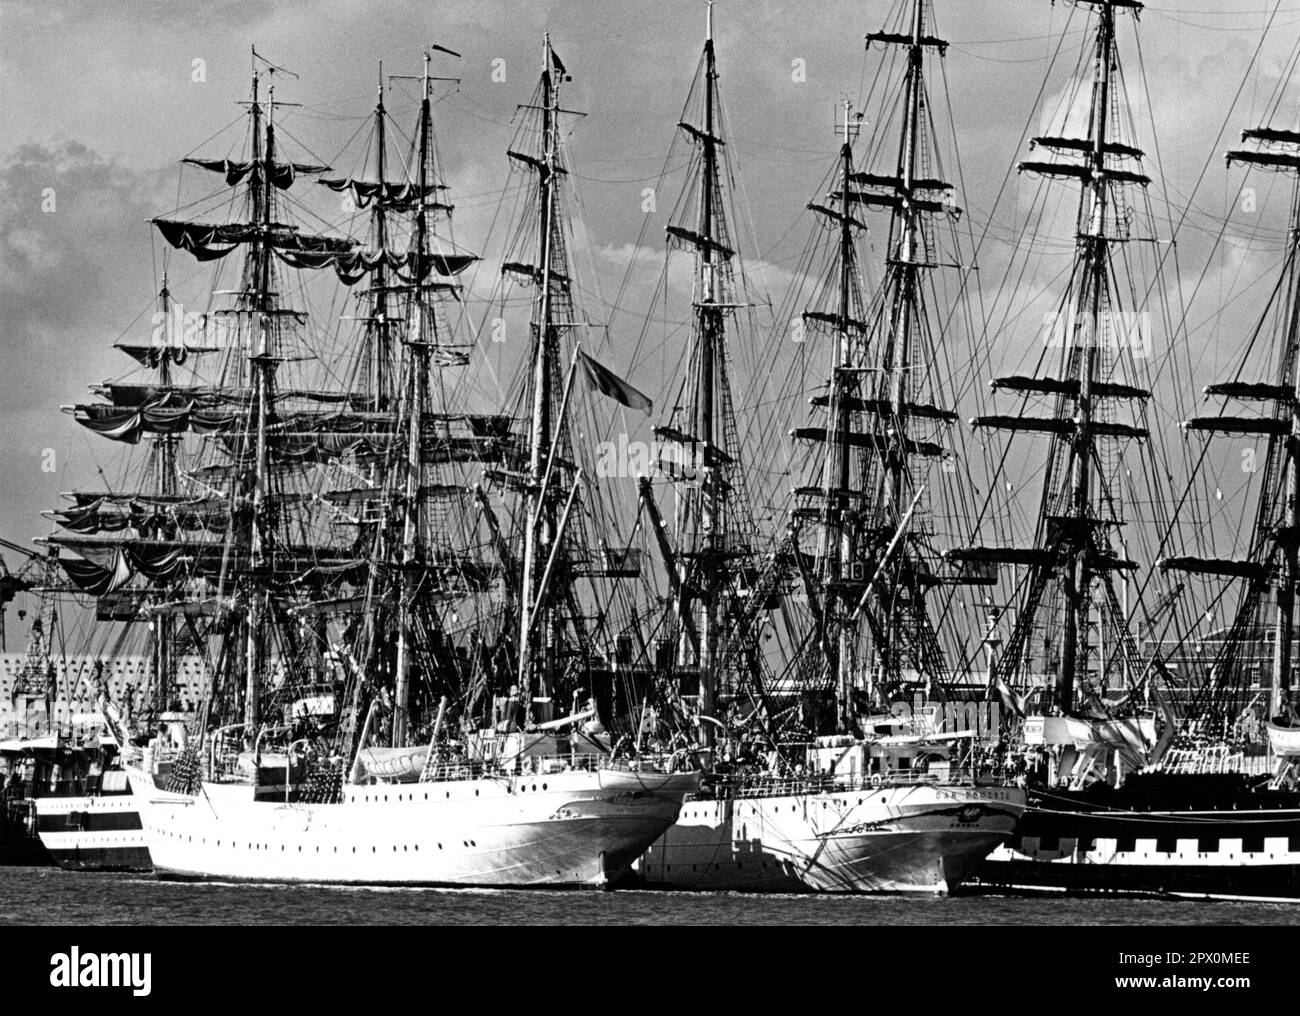 AJAXNETPHOTO. AUGUST, 1974. PORTSMOUTH, ENGLAND.  - YARDS AND YARDS AND - A FOREST OF MASTS AND YARDS TOWERED OVER THE HISTORIC NAVAL CITY  SKYLINE WHEN TALL SHIPS VISITED THE PORT AFTER RACING FROM CORUNNA, SPAIN. PICTURED ARE, (L-R) AMERIGO VESPUCCI (IT), TOVARISCH (POL), DAR POMORZA (POL) AND KRUZENSHTERN (USSR). PHOTO:JONATHAN EASTLAND/AJAX REF: 1974 1408 Stock Photo